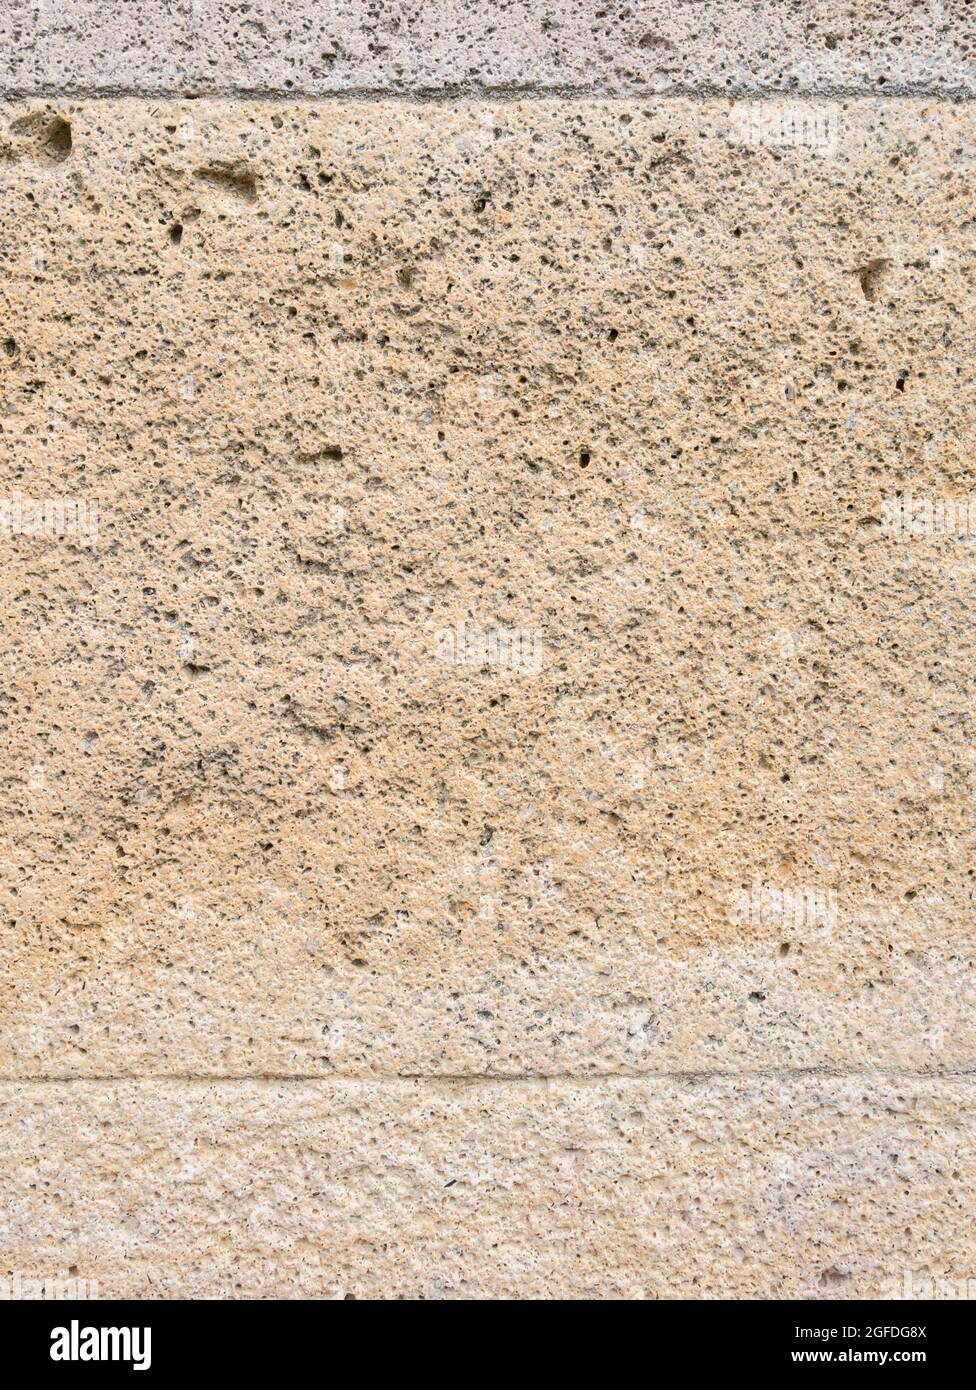 Close-up shot of weathered yellowy sandstone which almost has a sponge or sponge-like texture. For ageing stonework,decaying stonework. Stock Photo